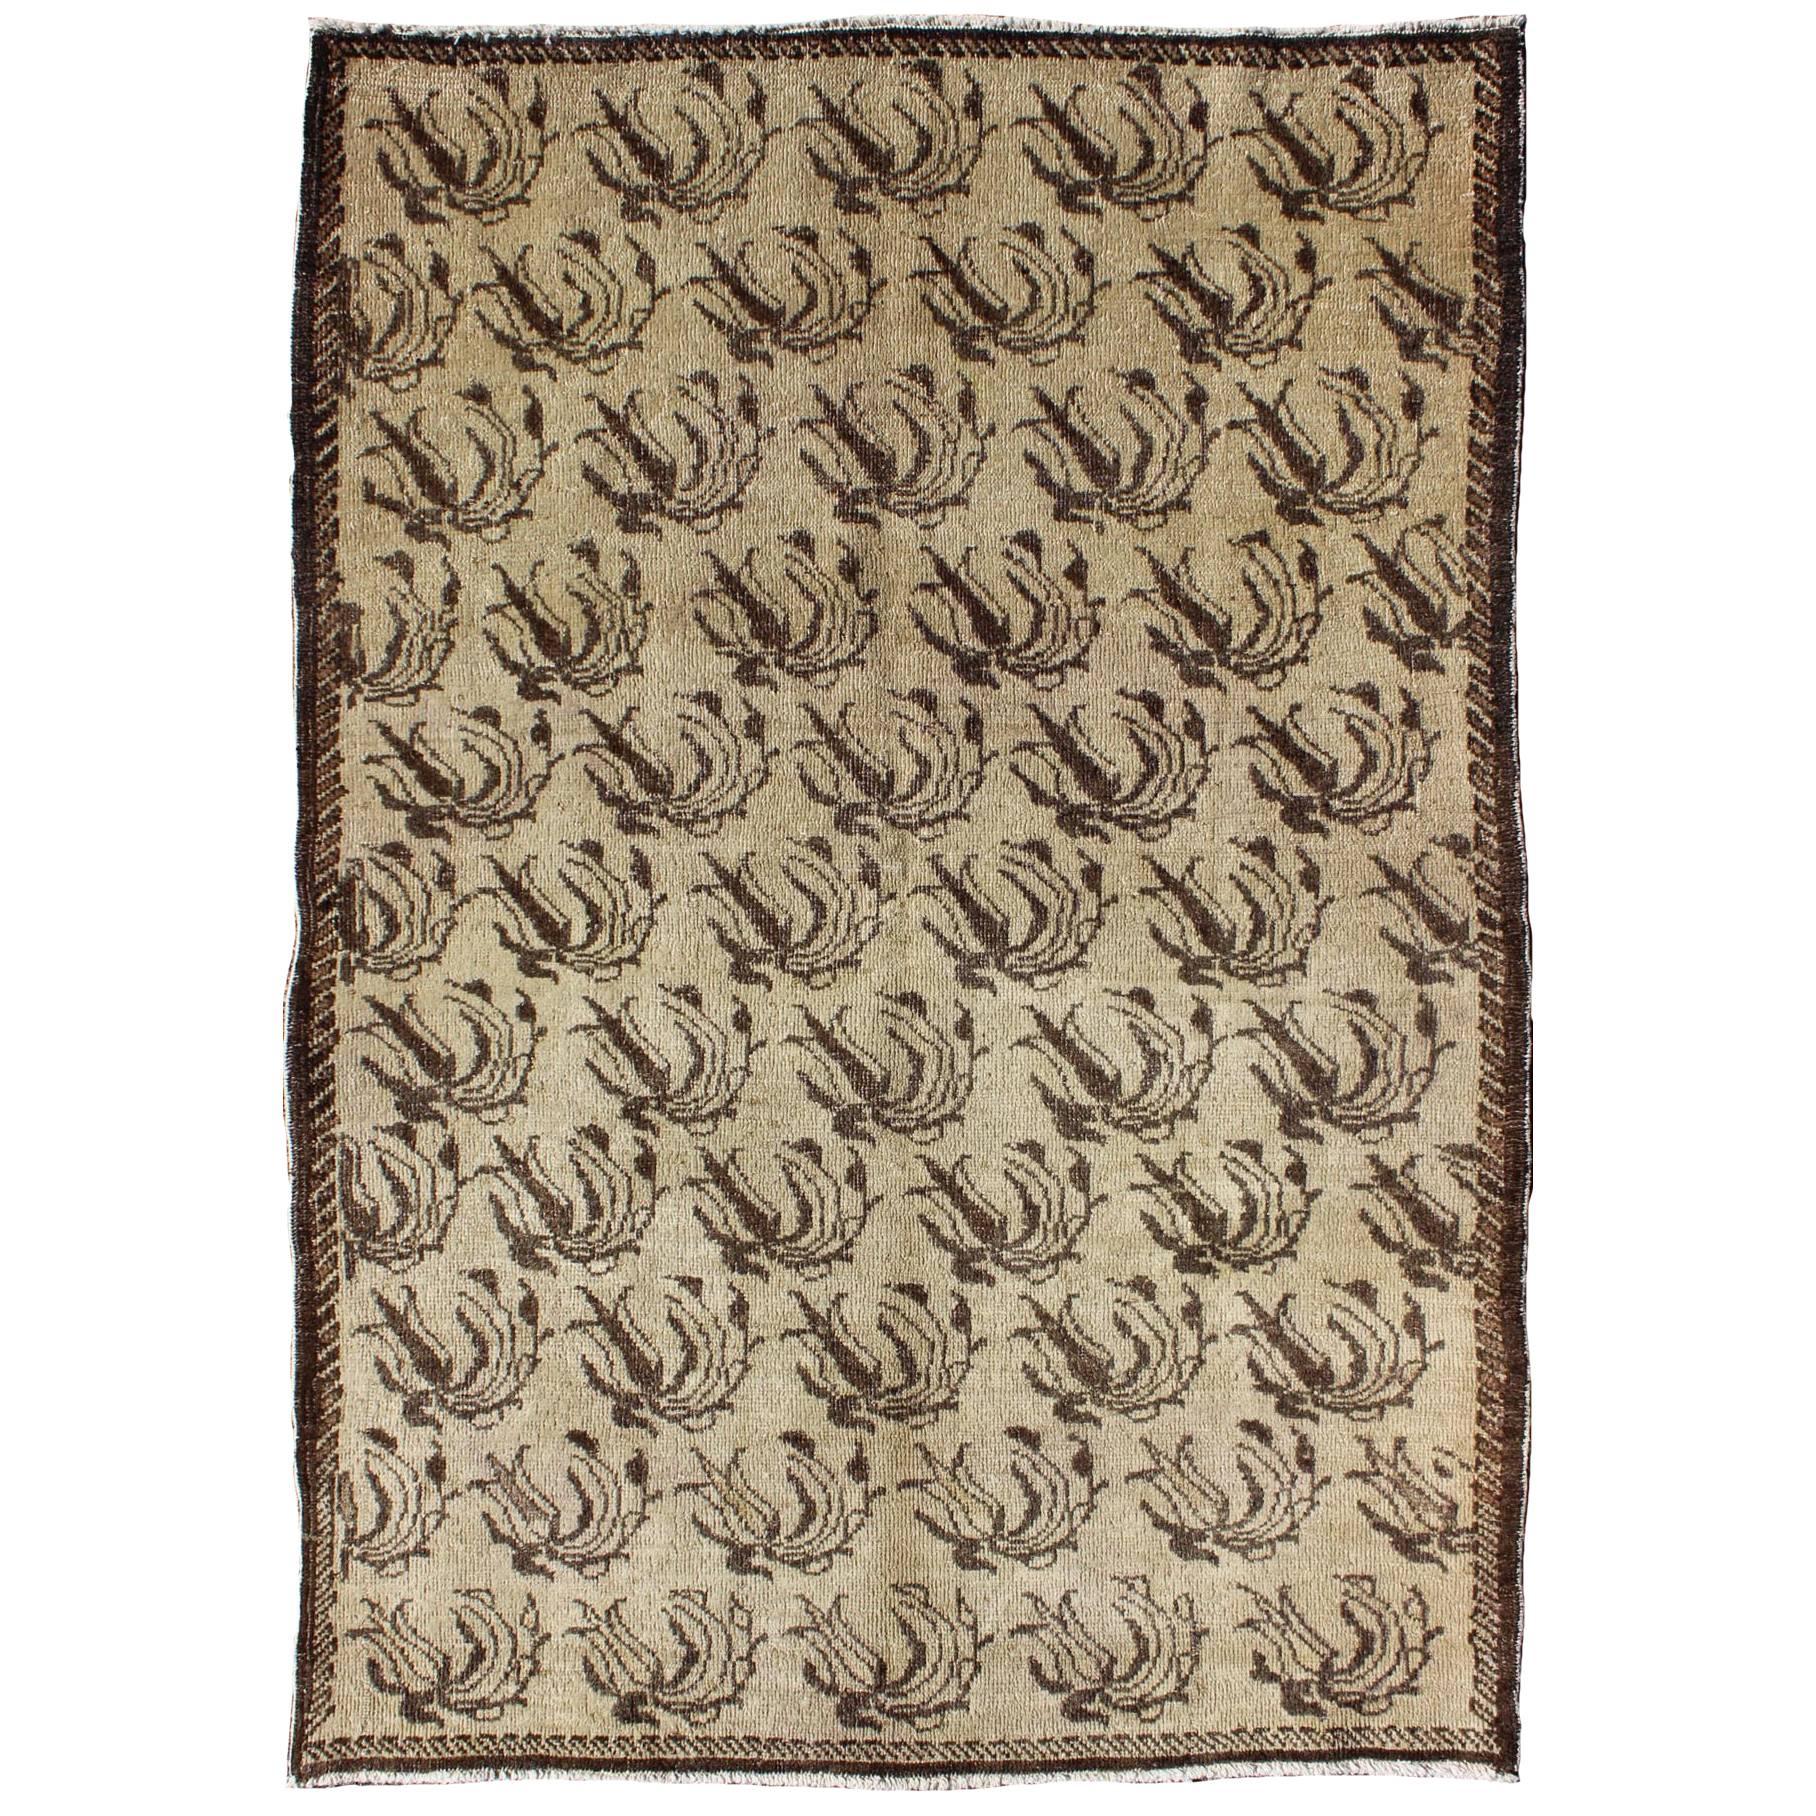 All-Over Floral Design Turkish Rug in Shades of Brown